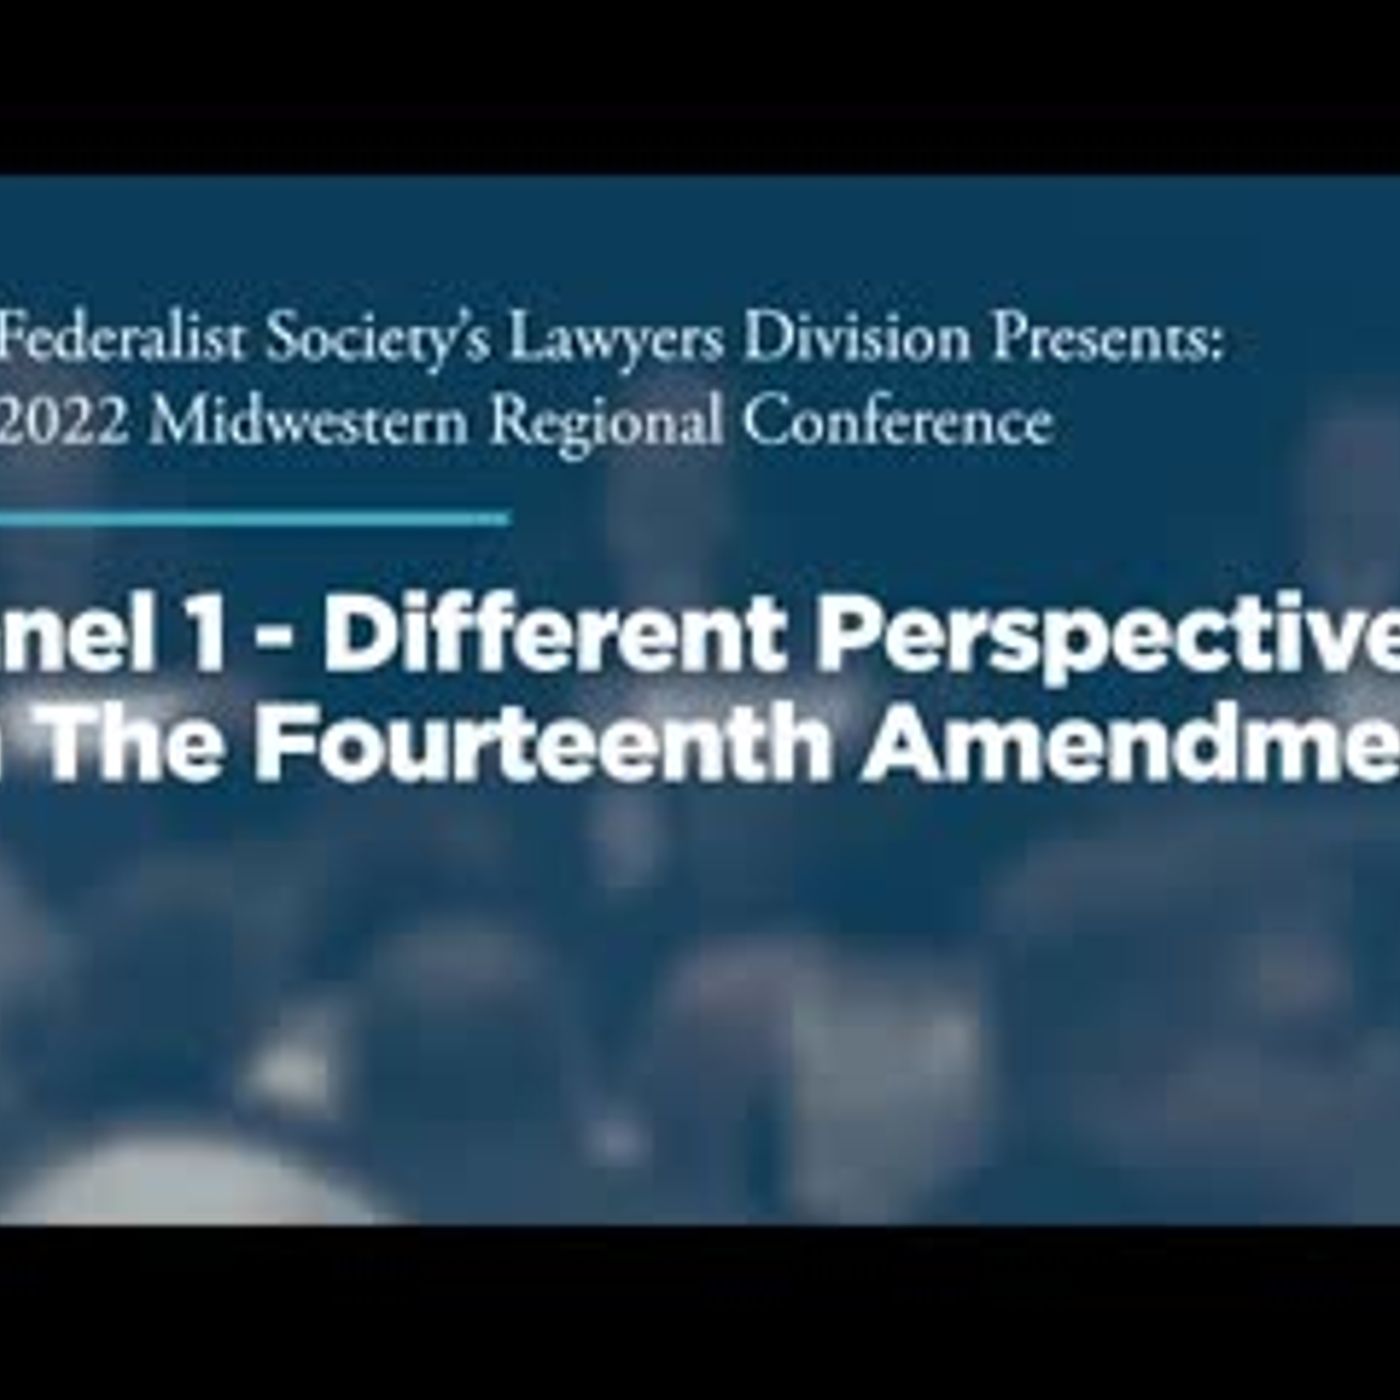 Panel 1 - Different Perspectives on The Fourteenth Amendment